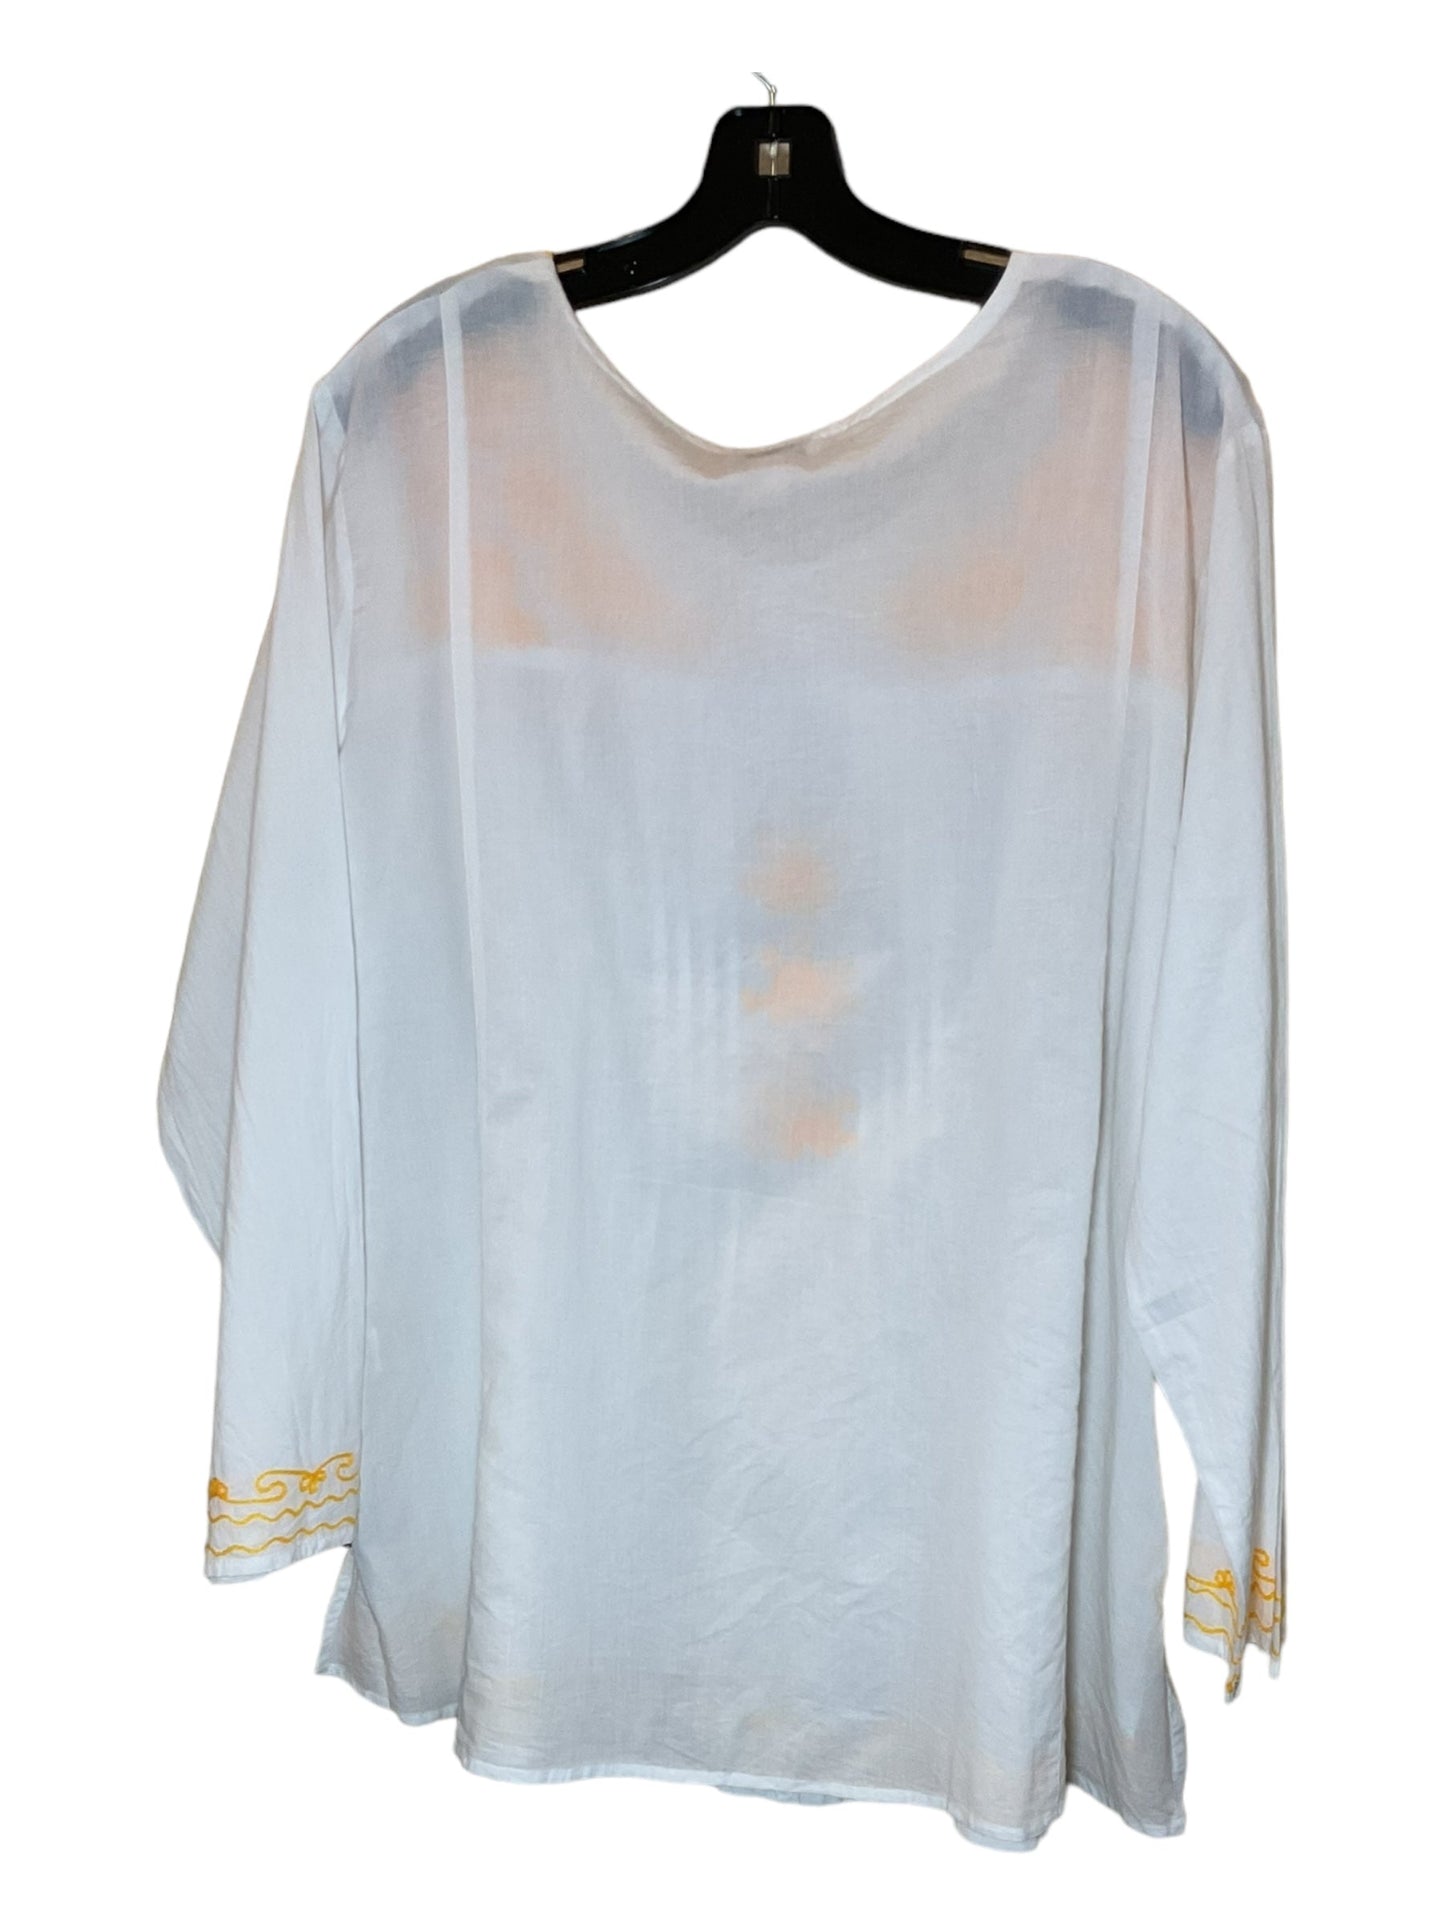 White Top Long Sleeve C And C, Size 3x